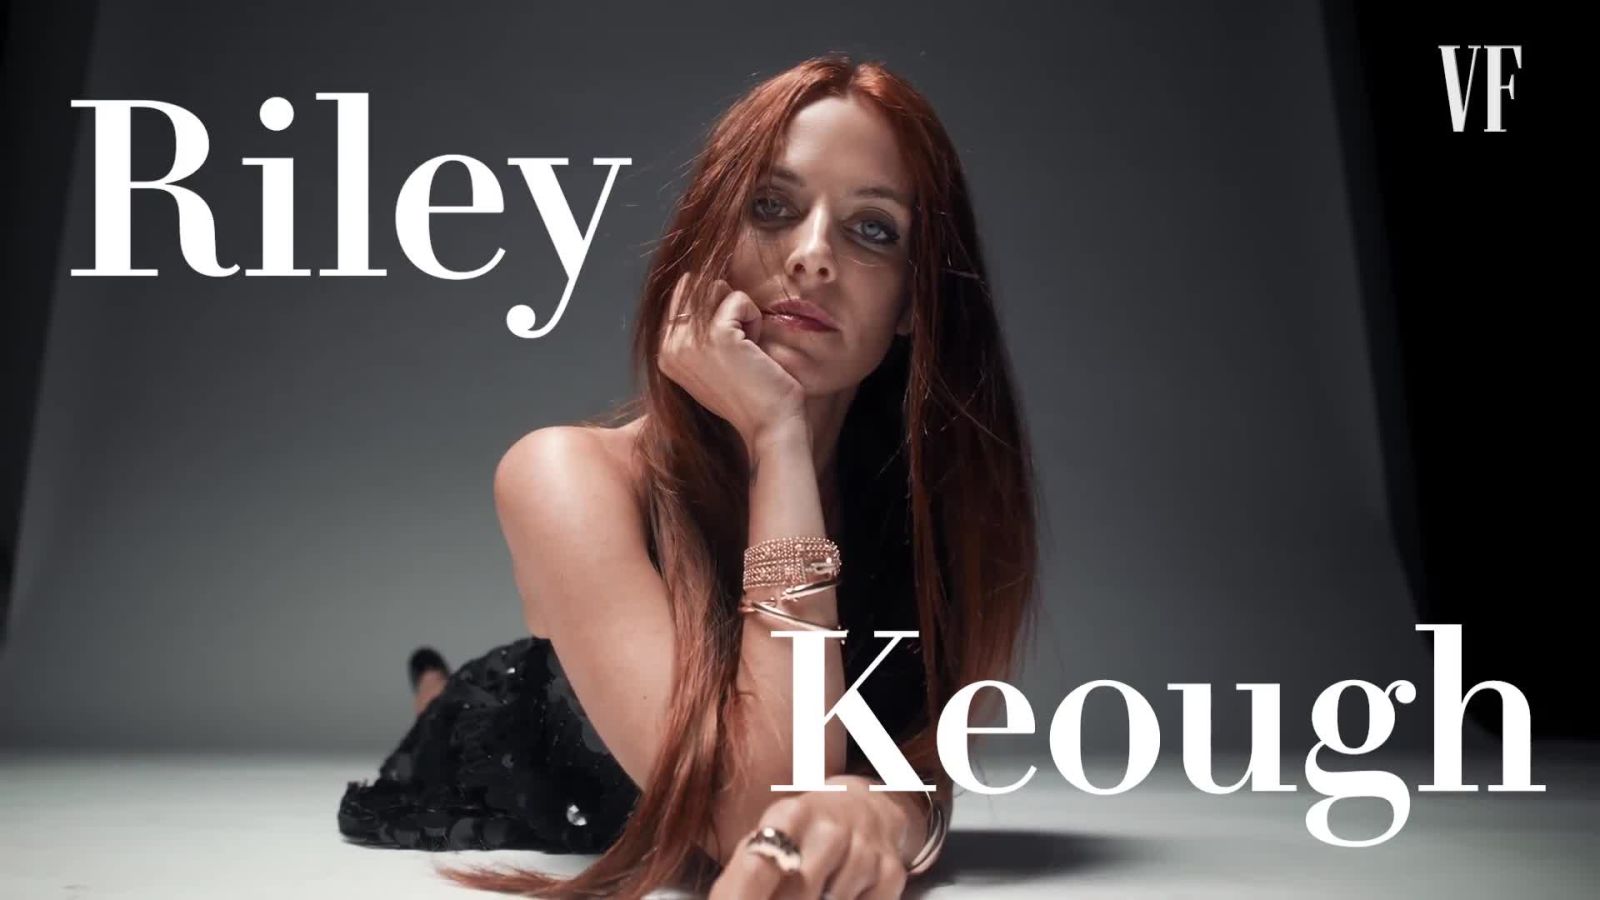 Behind the Scene's of Riley Keough's Cover Shoot